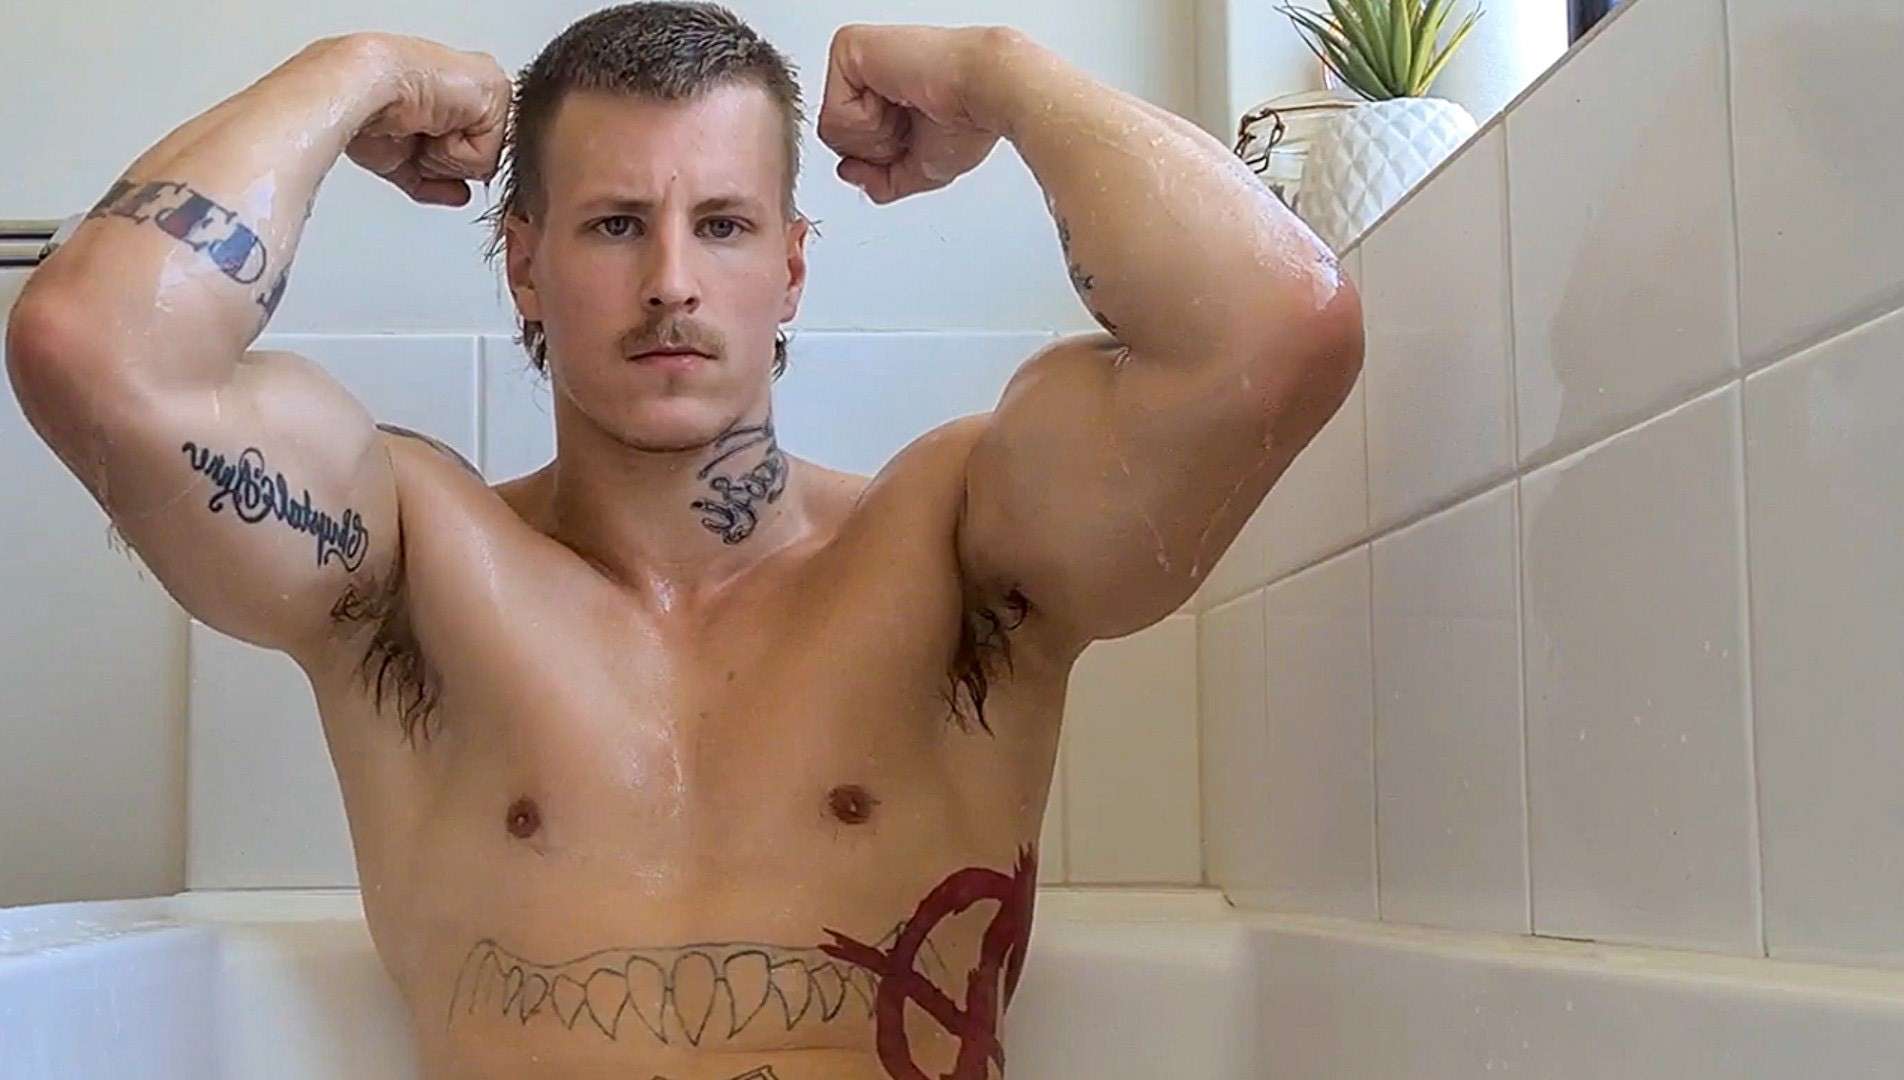 Alec Nysten turned to an OnlyFans explicit porn account to provide a family income, but image theft now threatens to ruin it photo picture pic